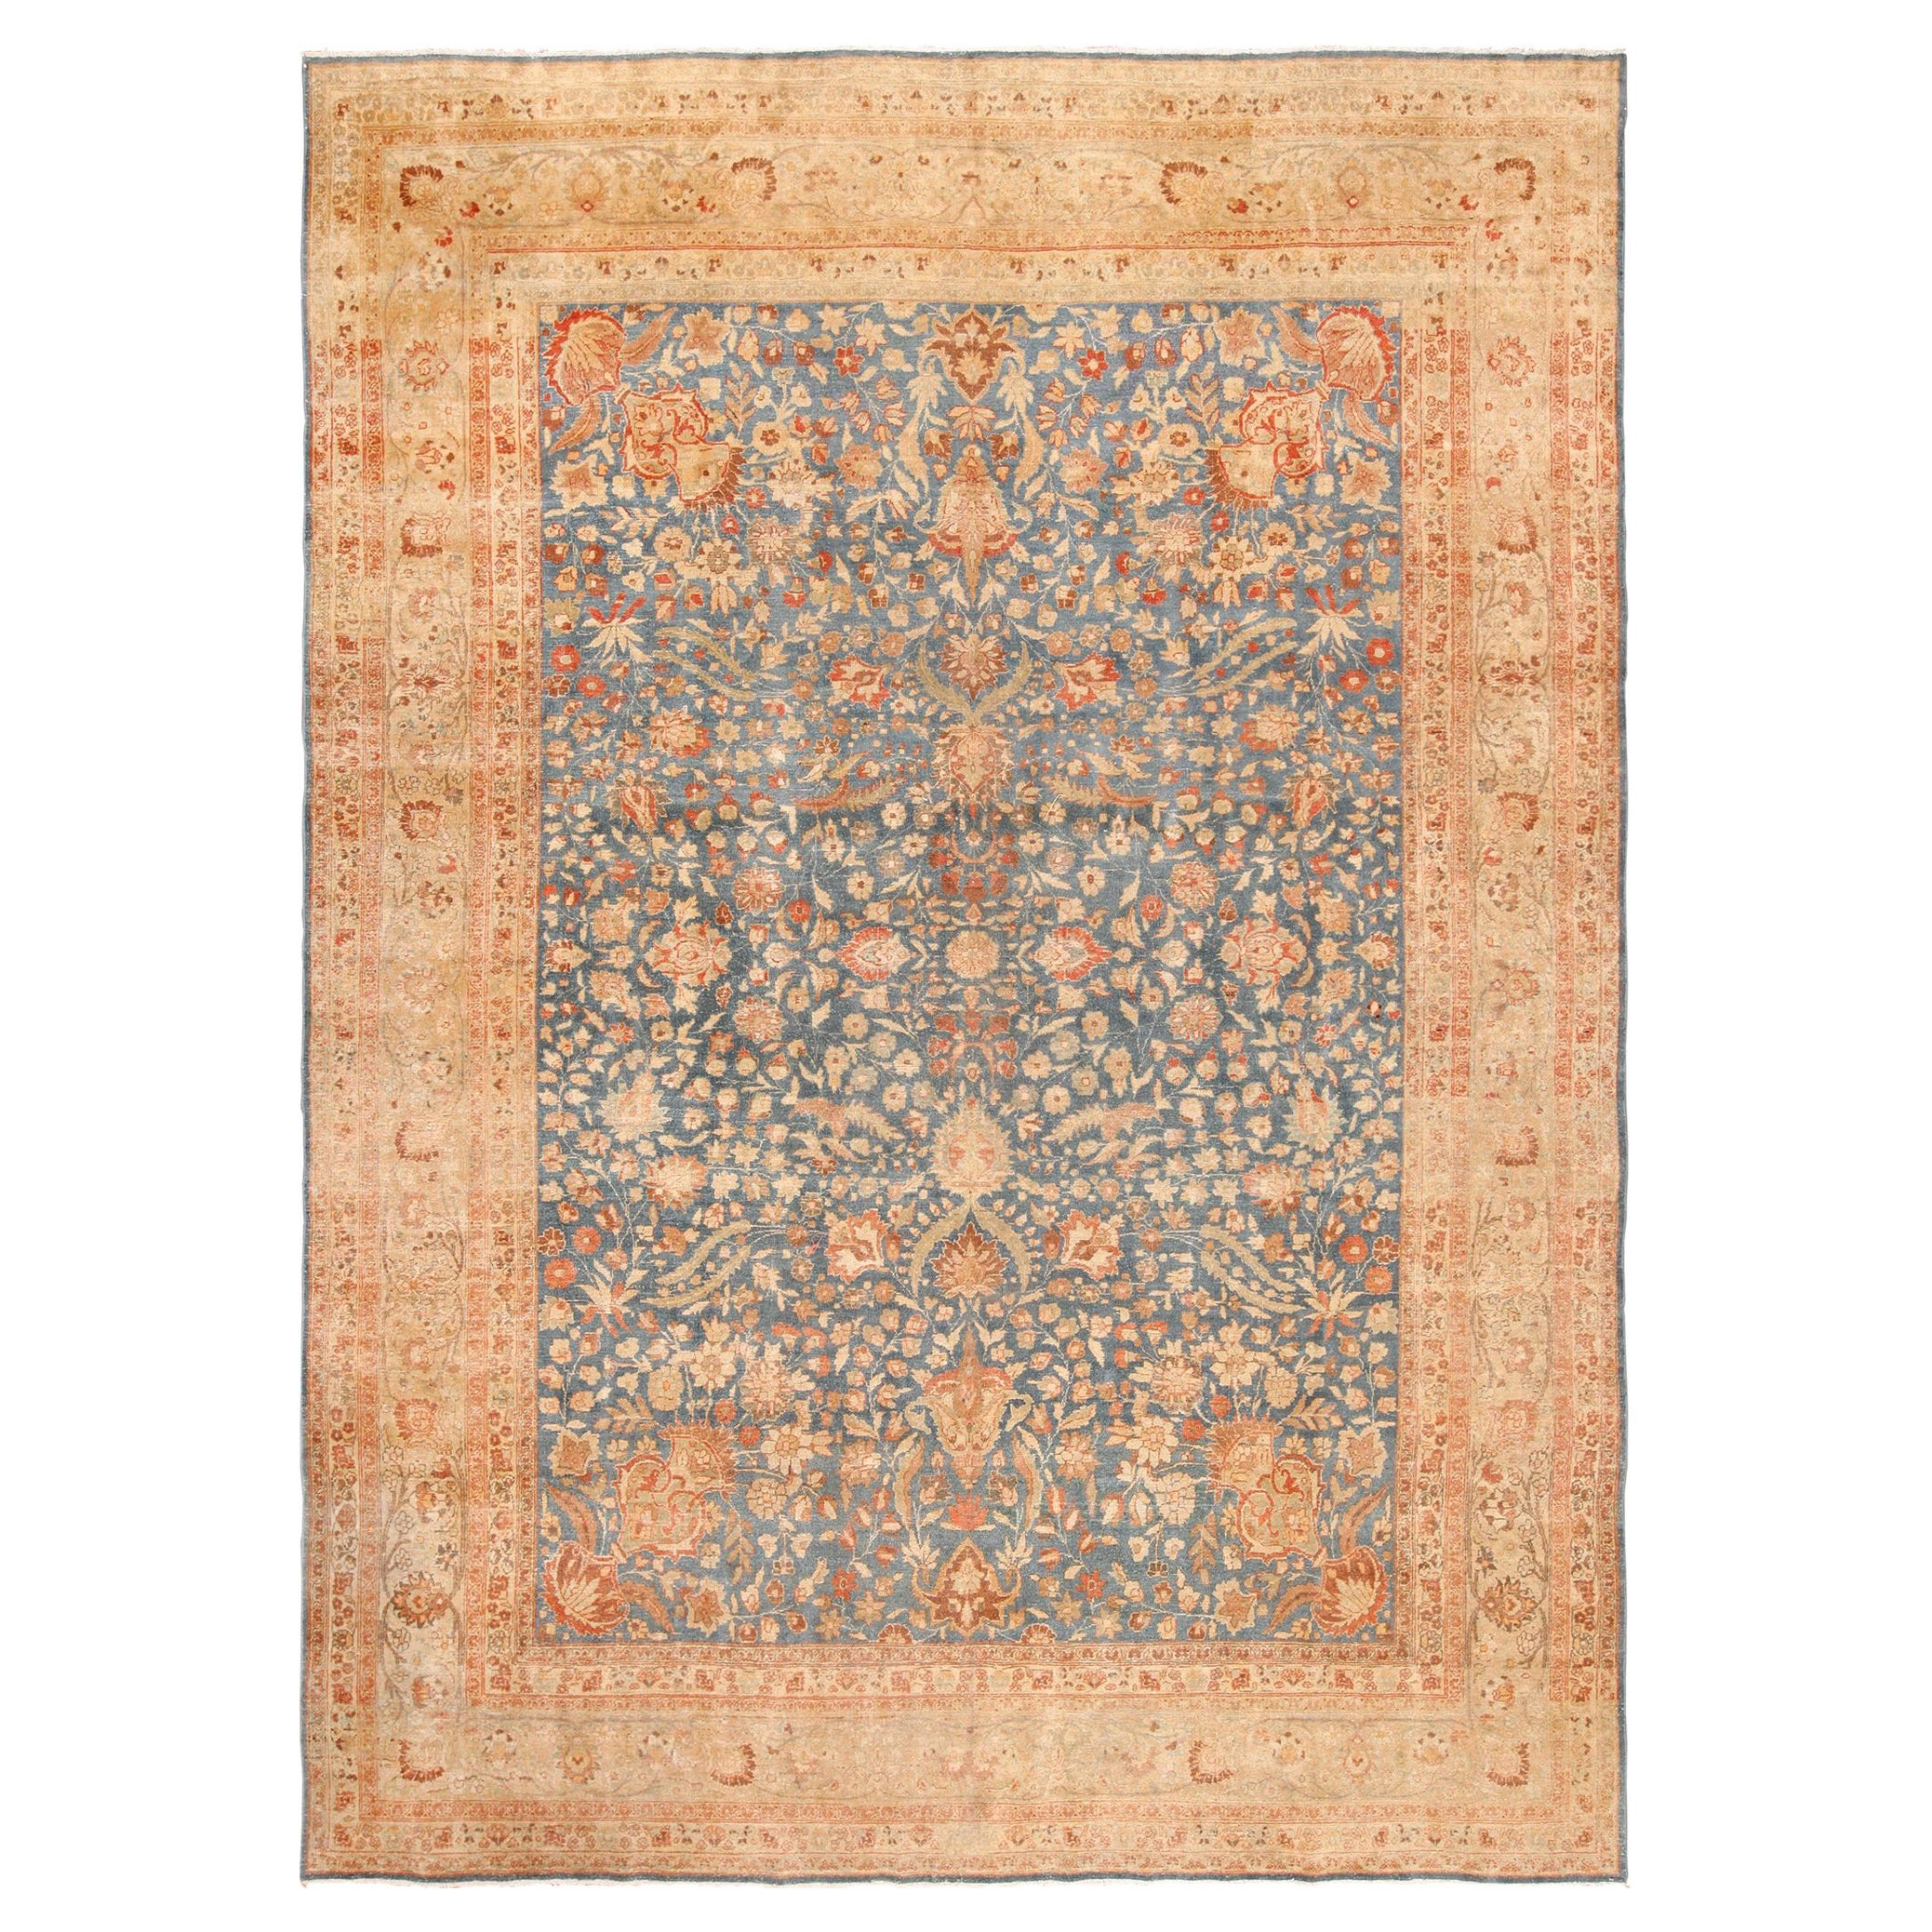 Breathtaking Antique Room Size Blue and Rust Persian Khorassan Rug 10' x 14'6"